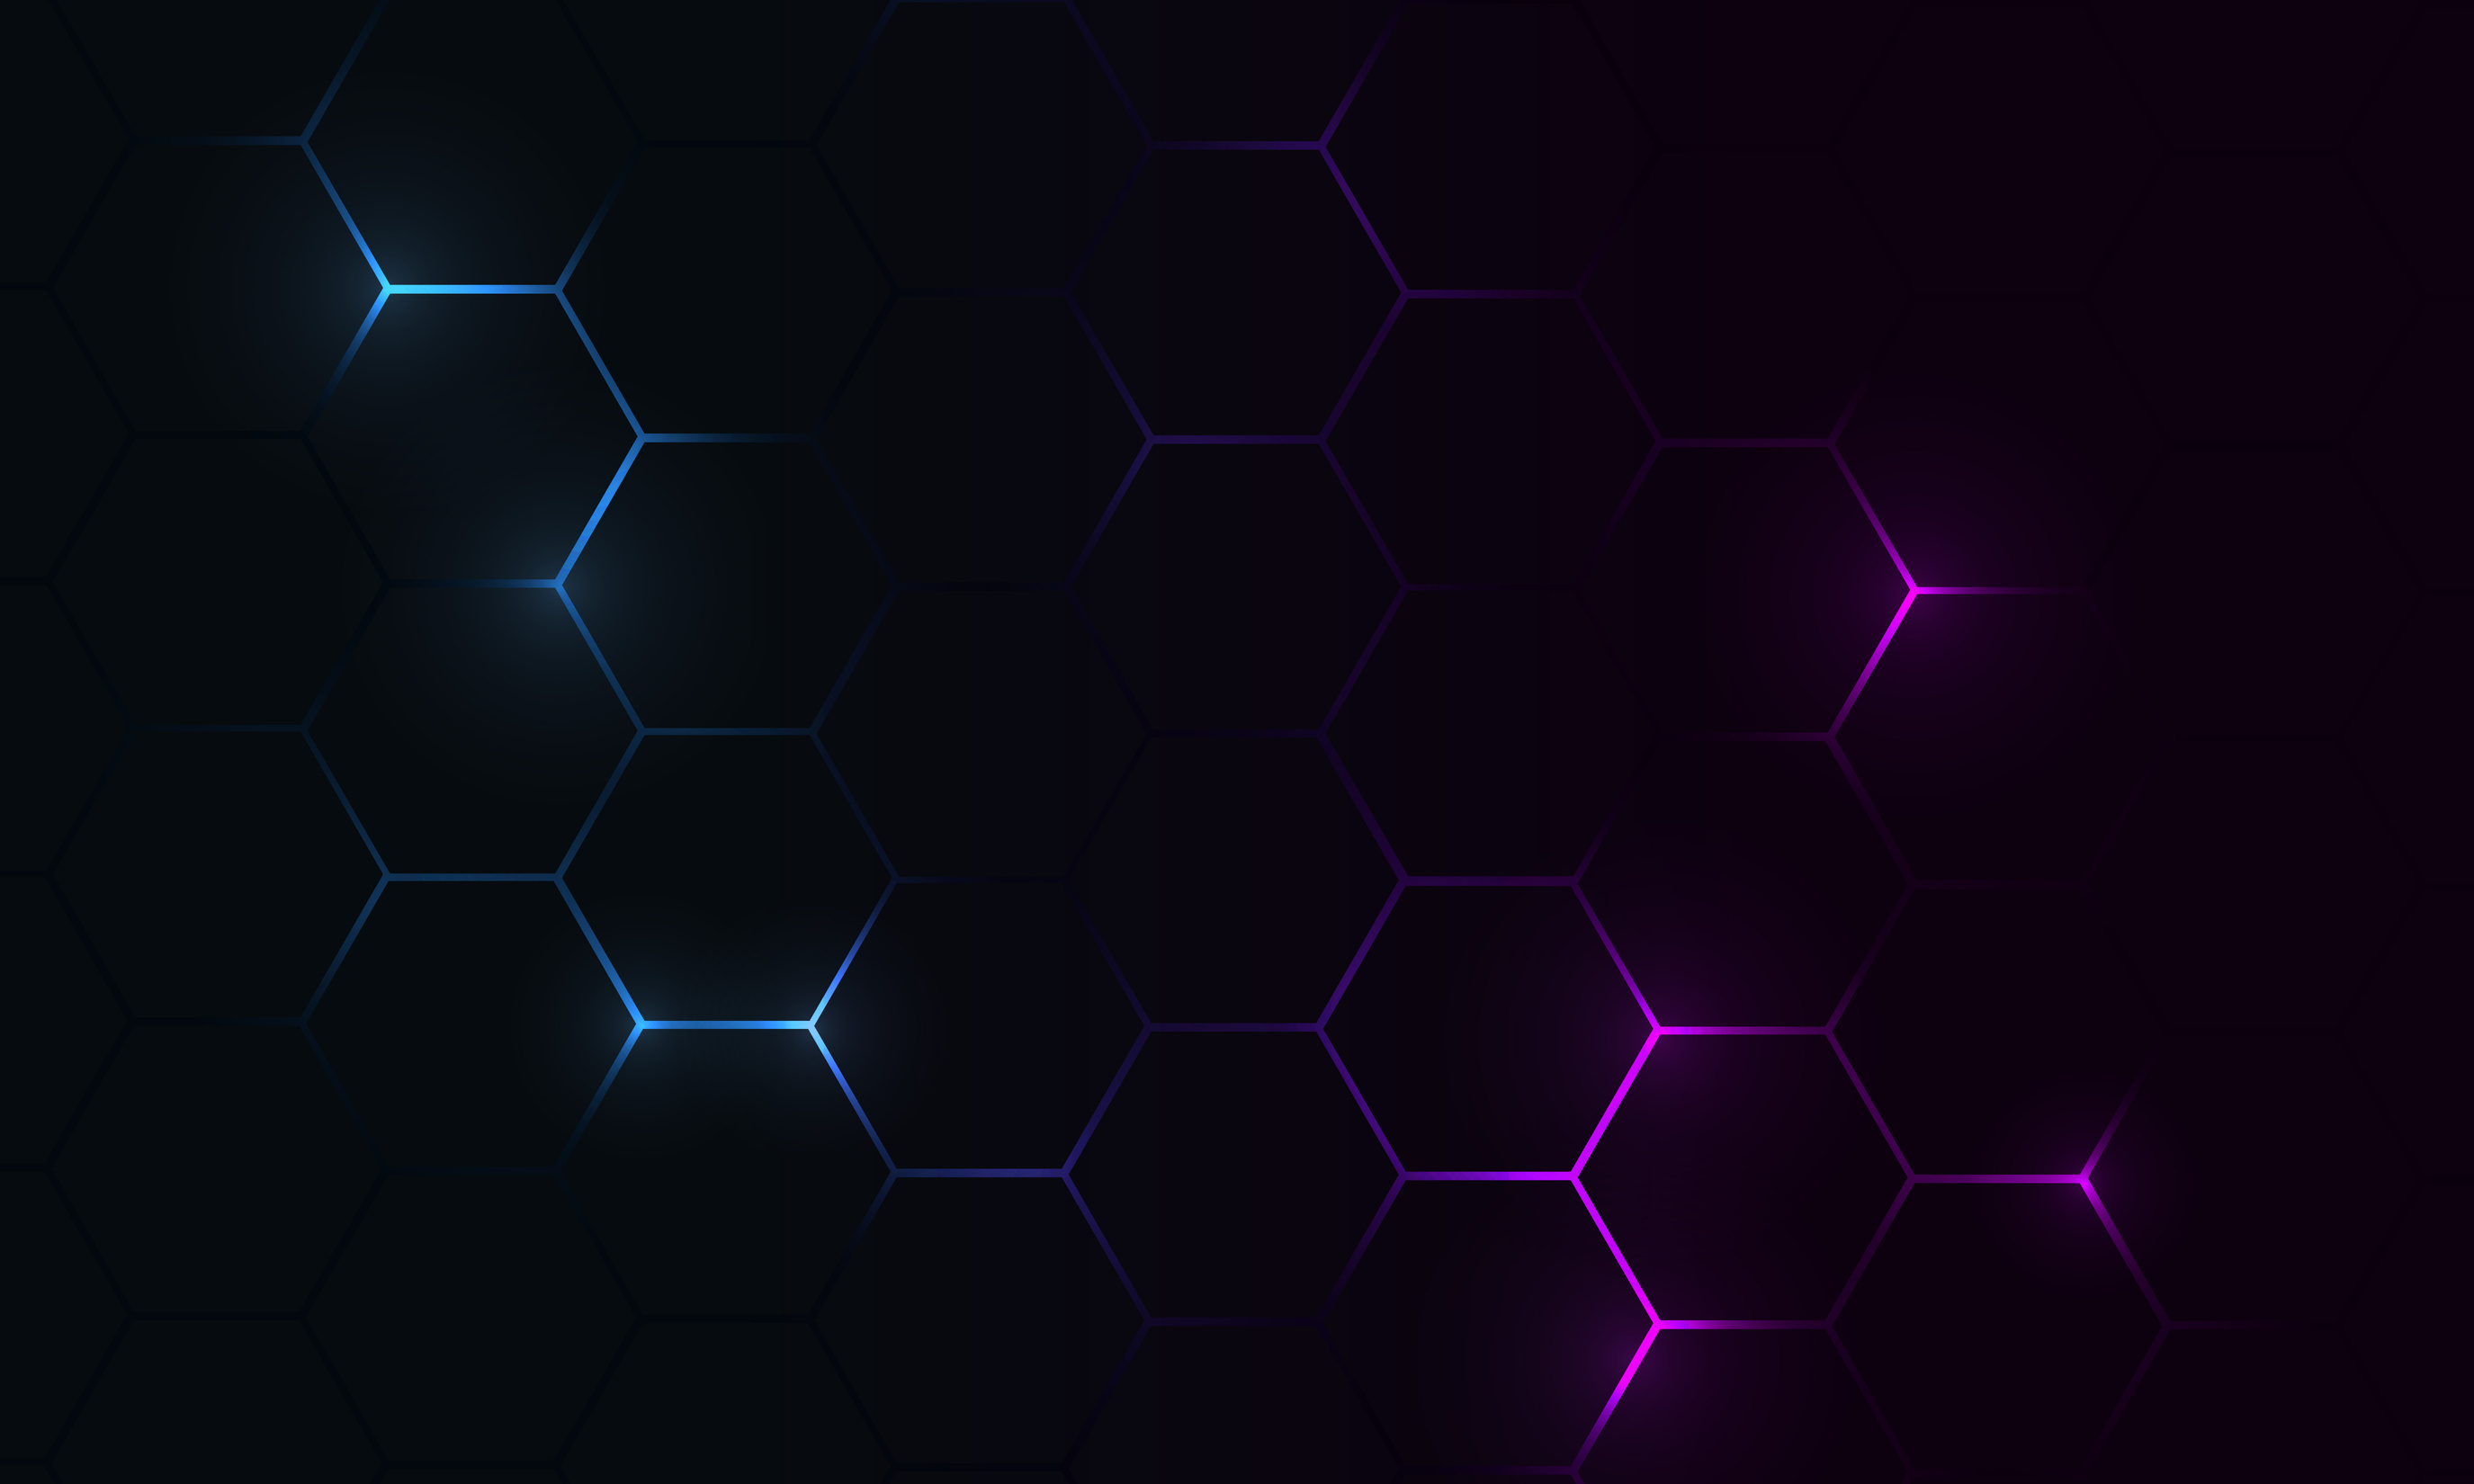 Dark hexagon abstract technology background with blue and pink colored bright flashes.